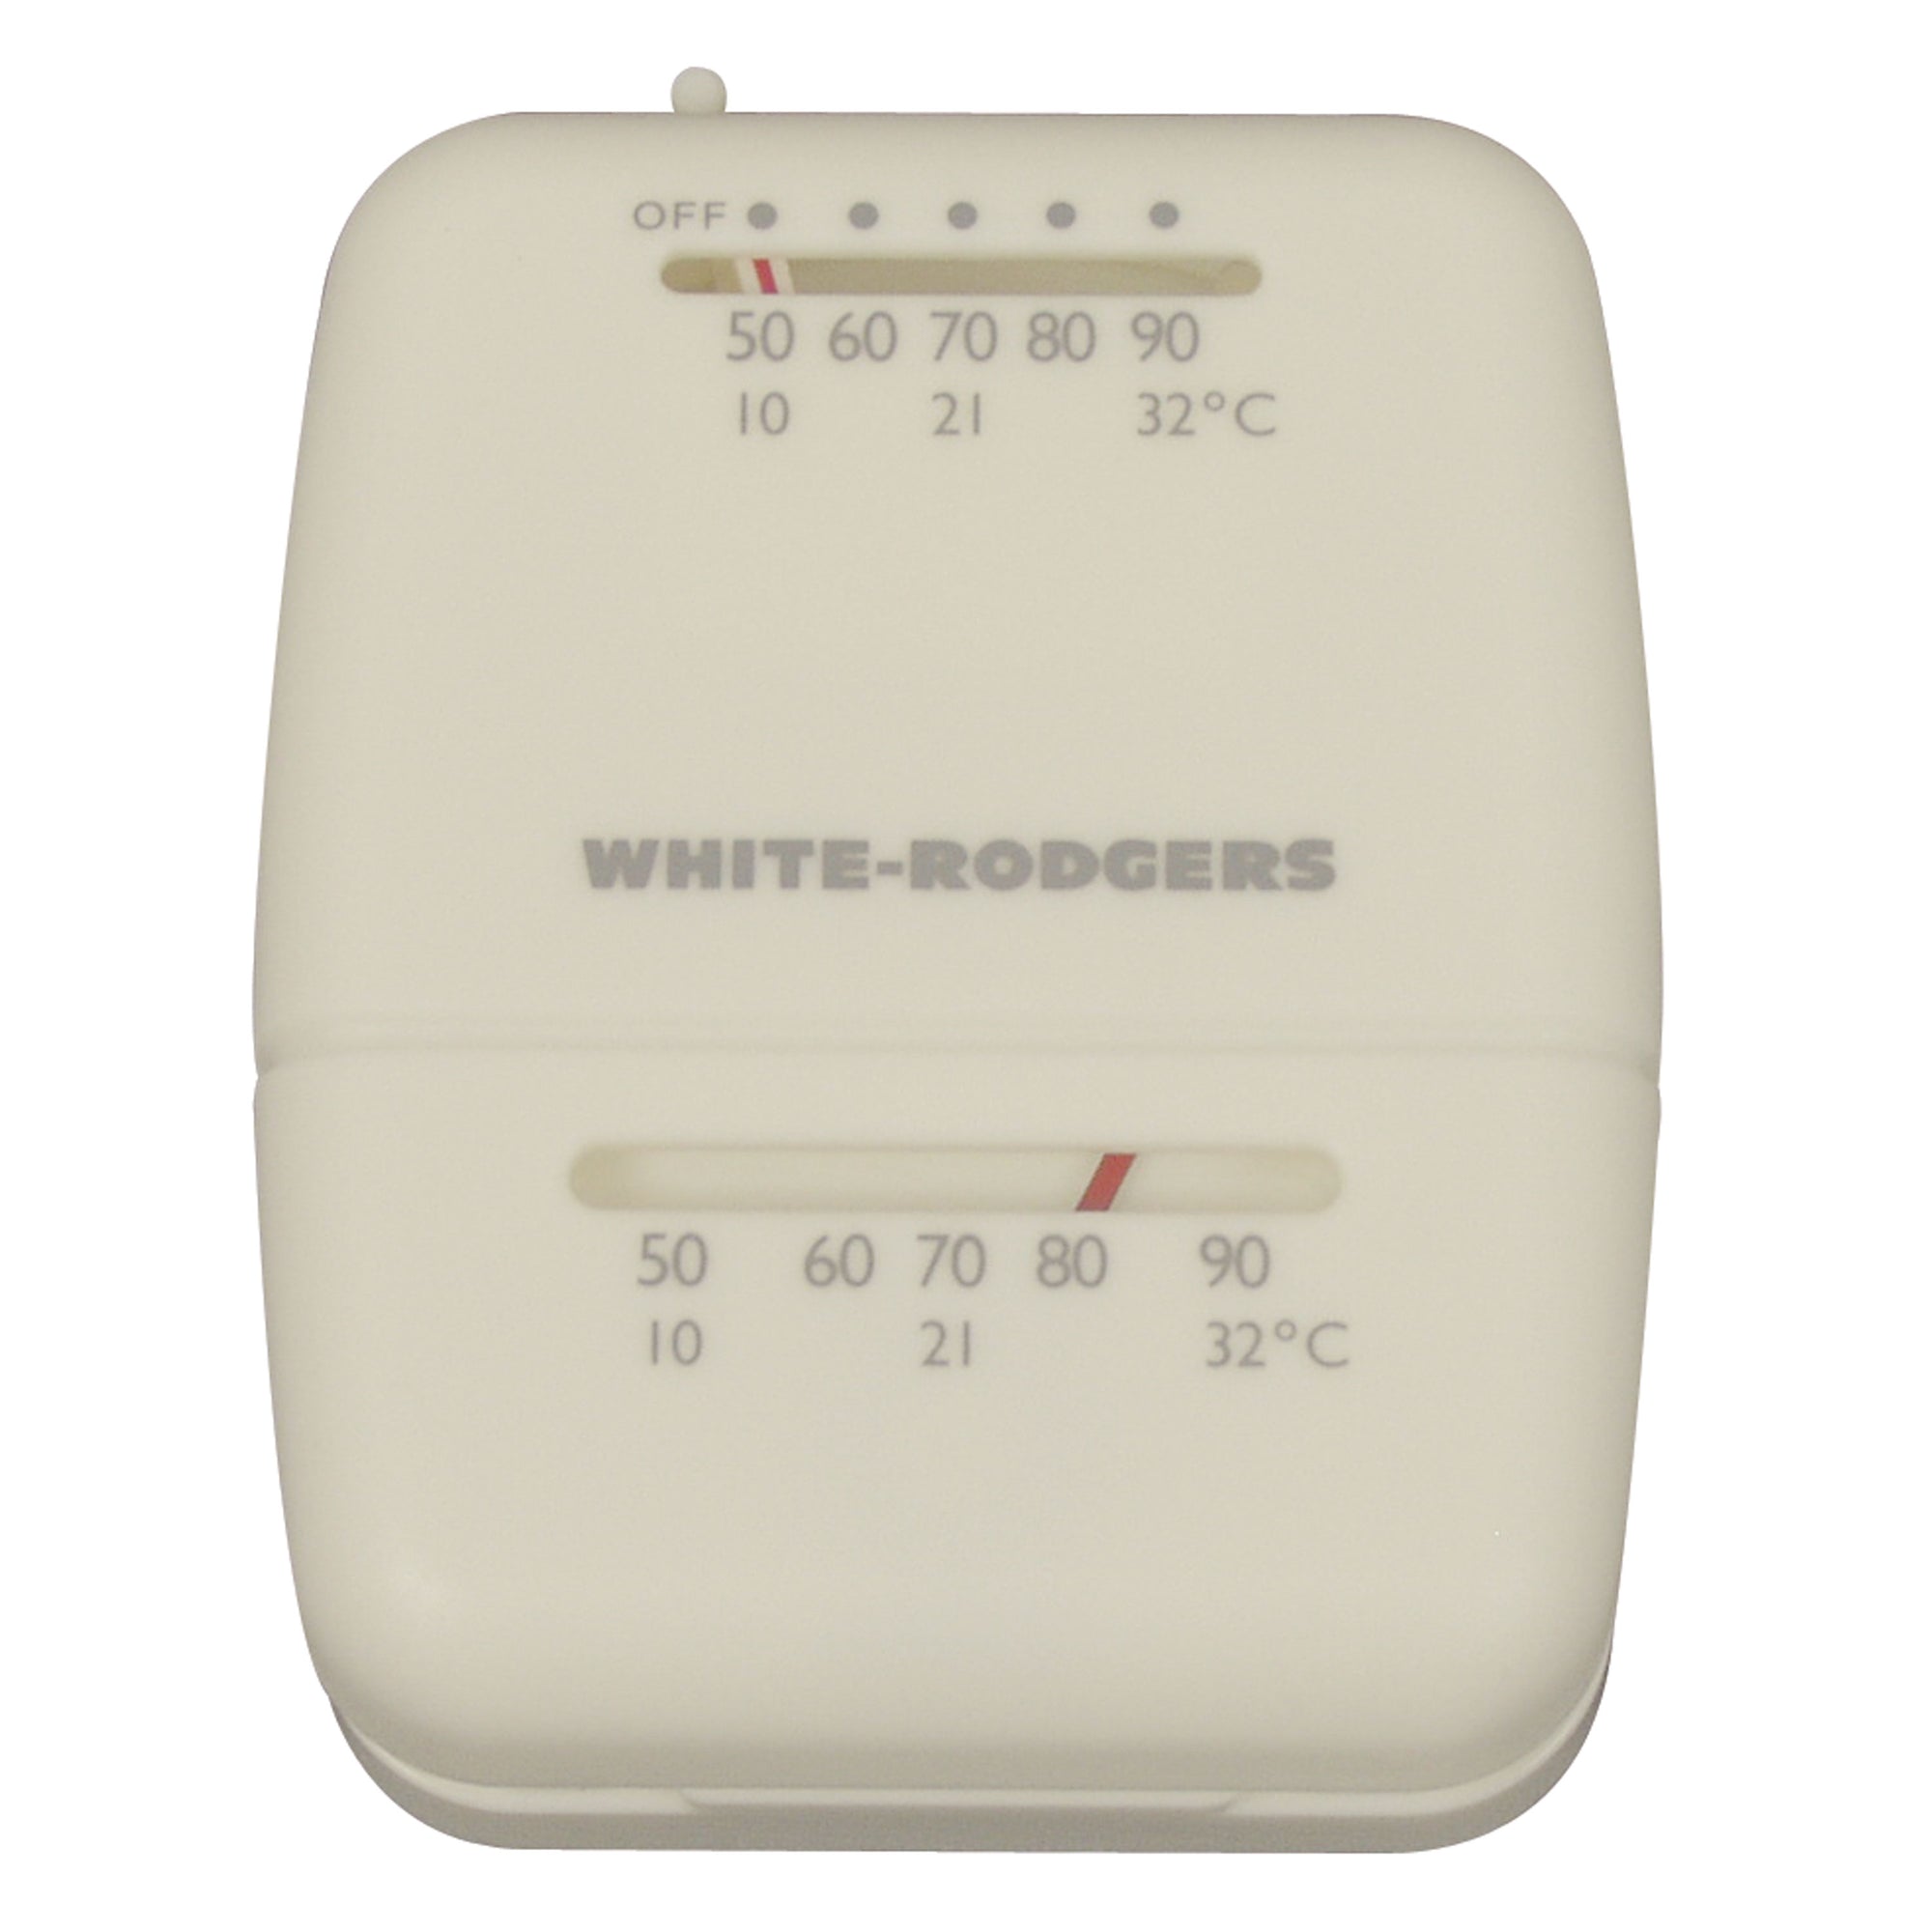 White-Rodgers 1C20101S1 White Rodgers Heating Thermostat - White